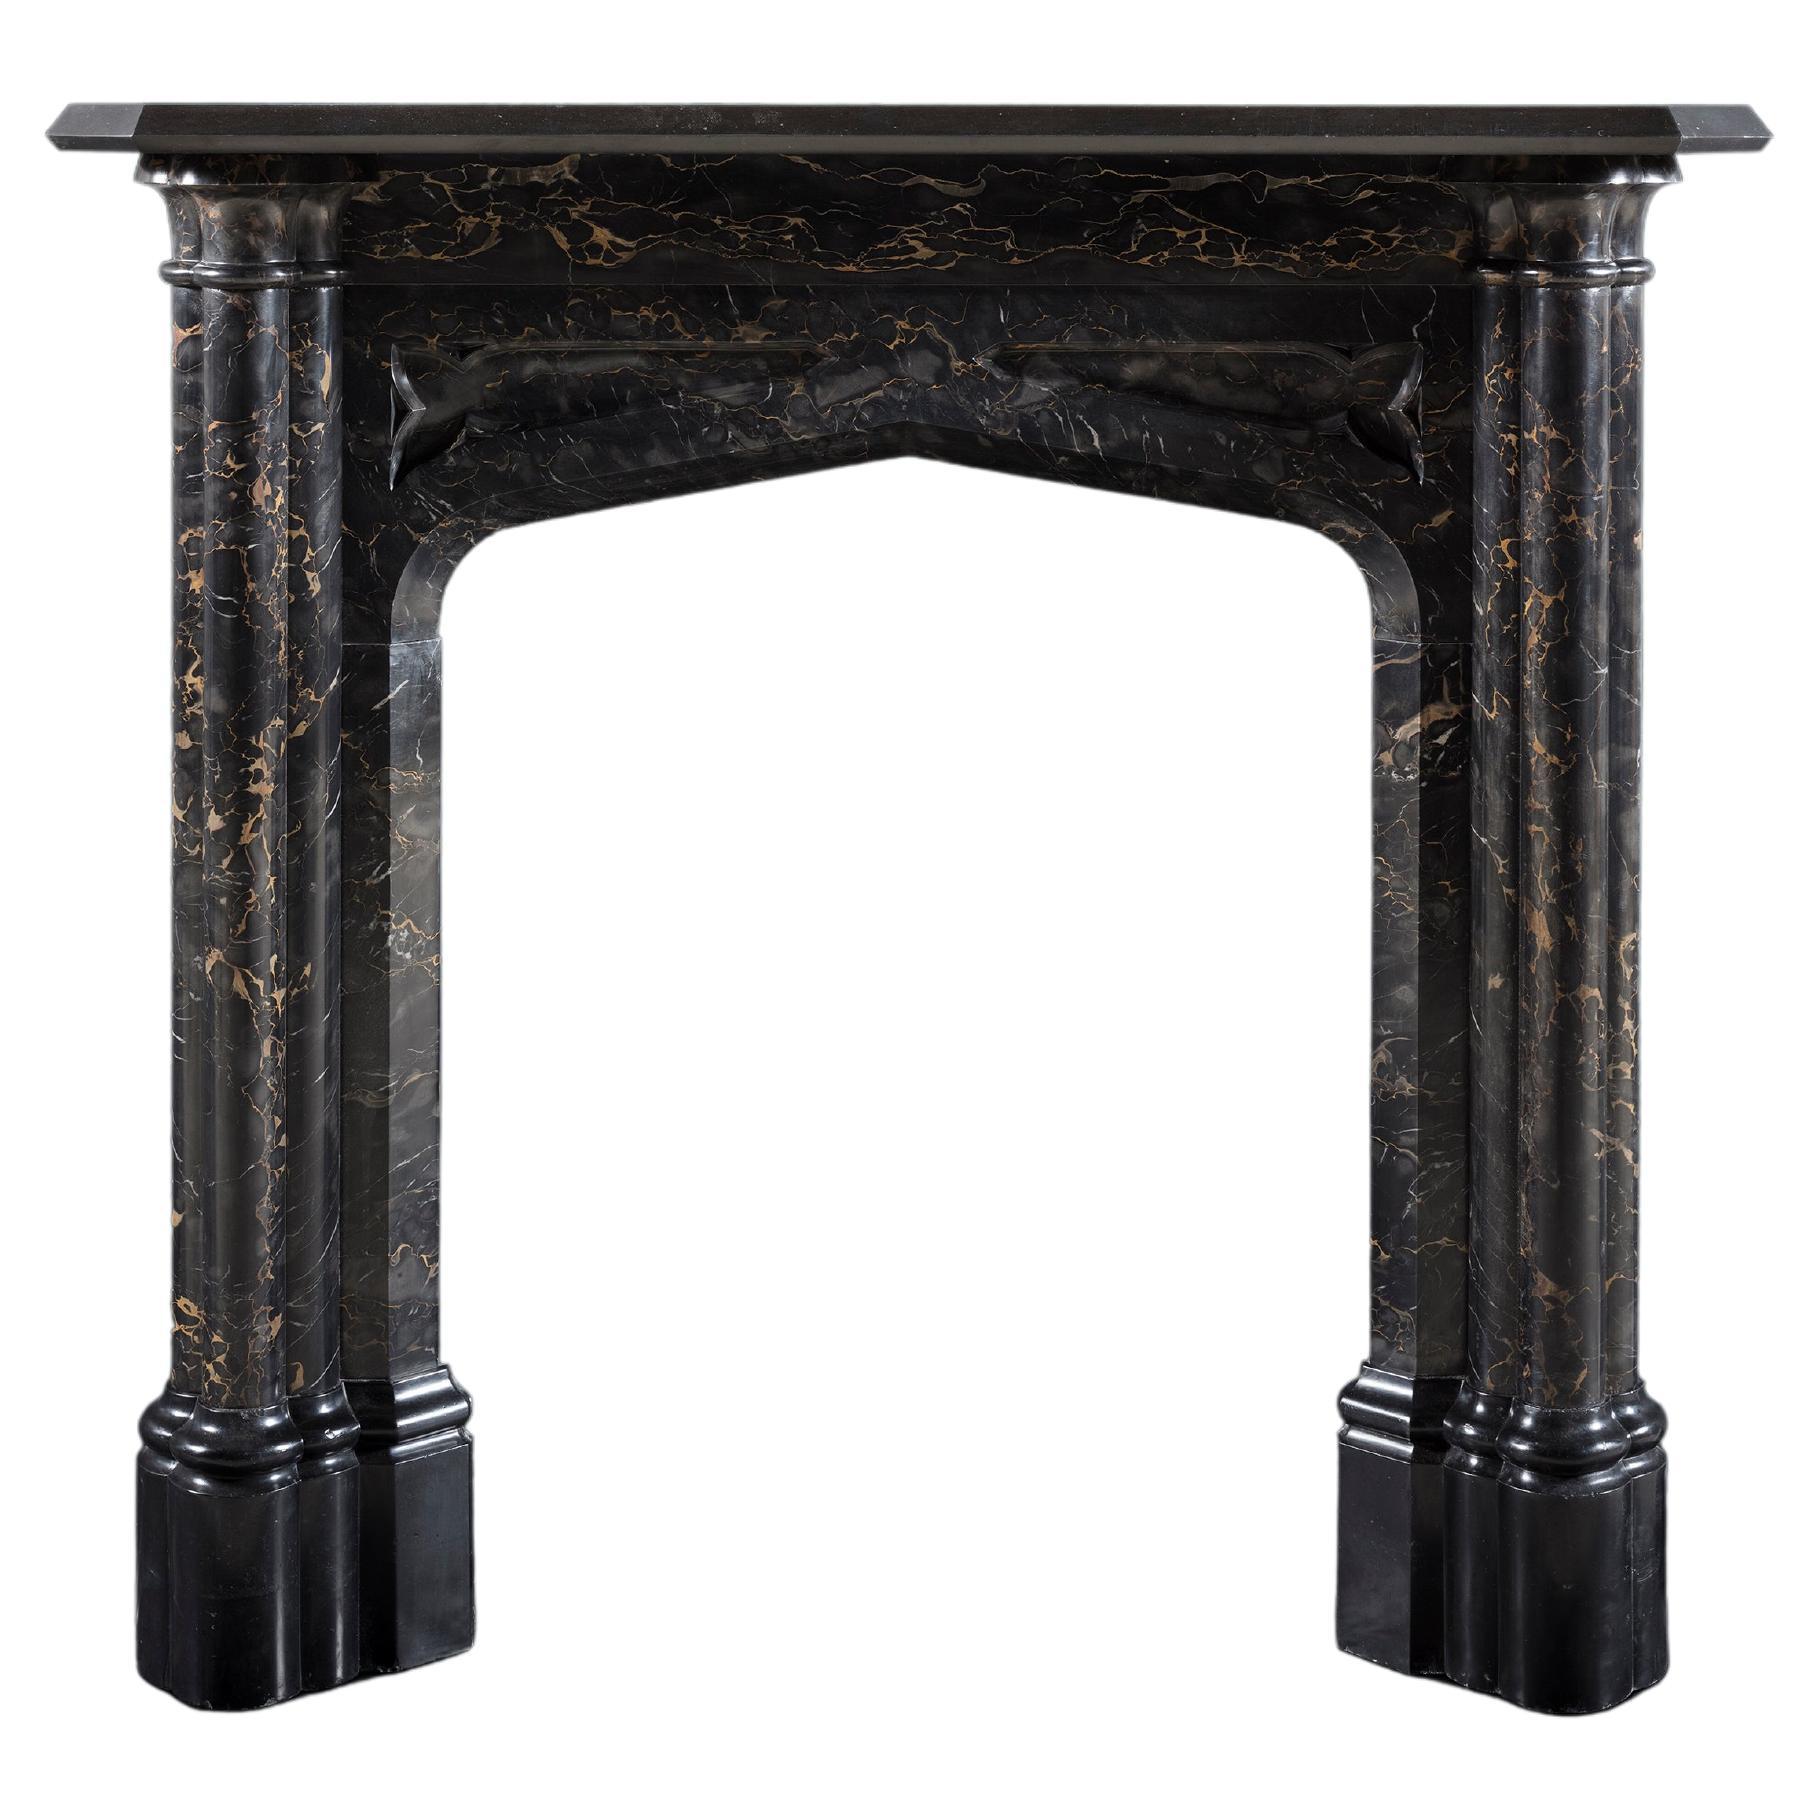 An Early 19th Century Gothic Revival Mantle in Portoro and Belgium Black Marble